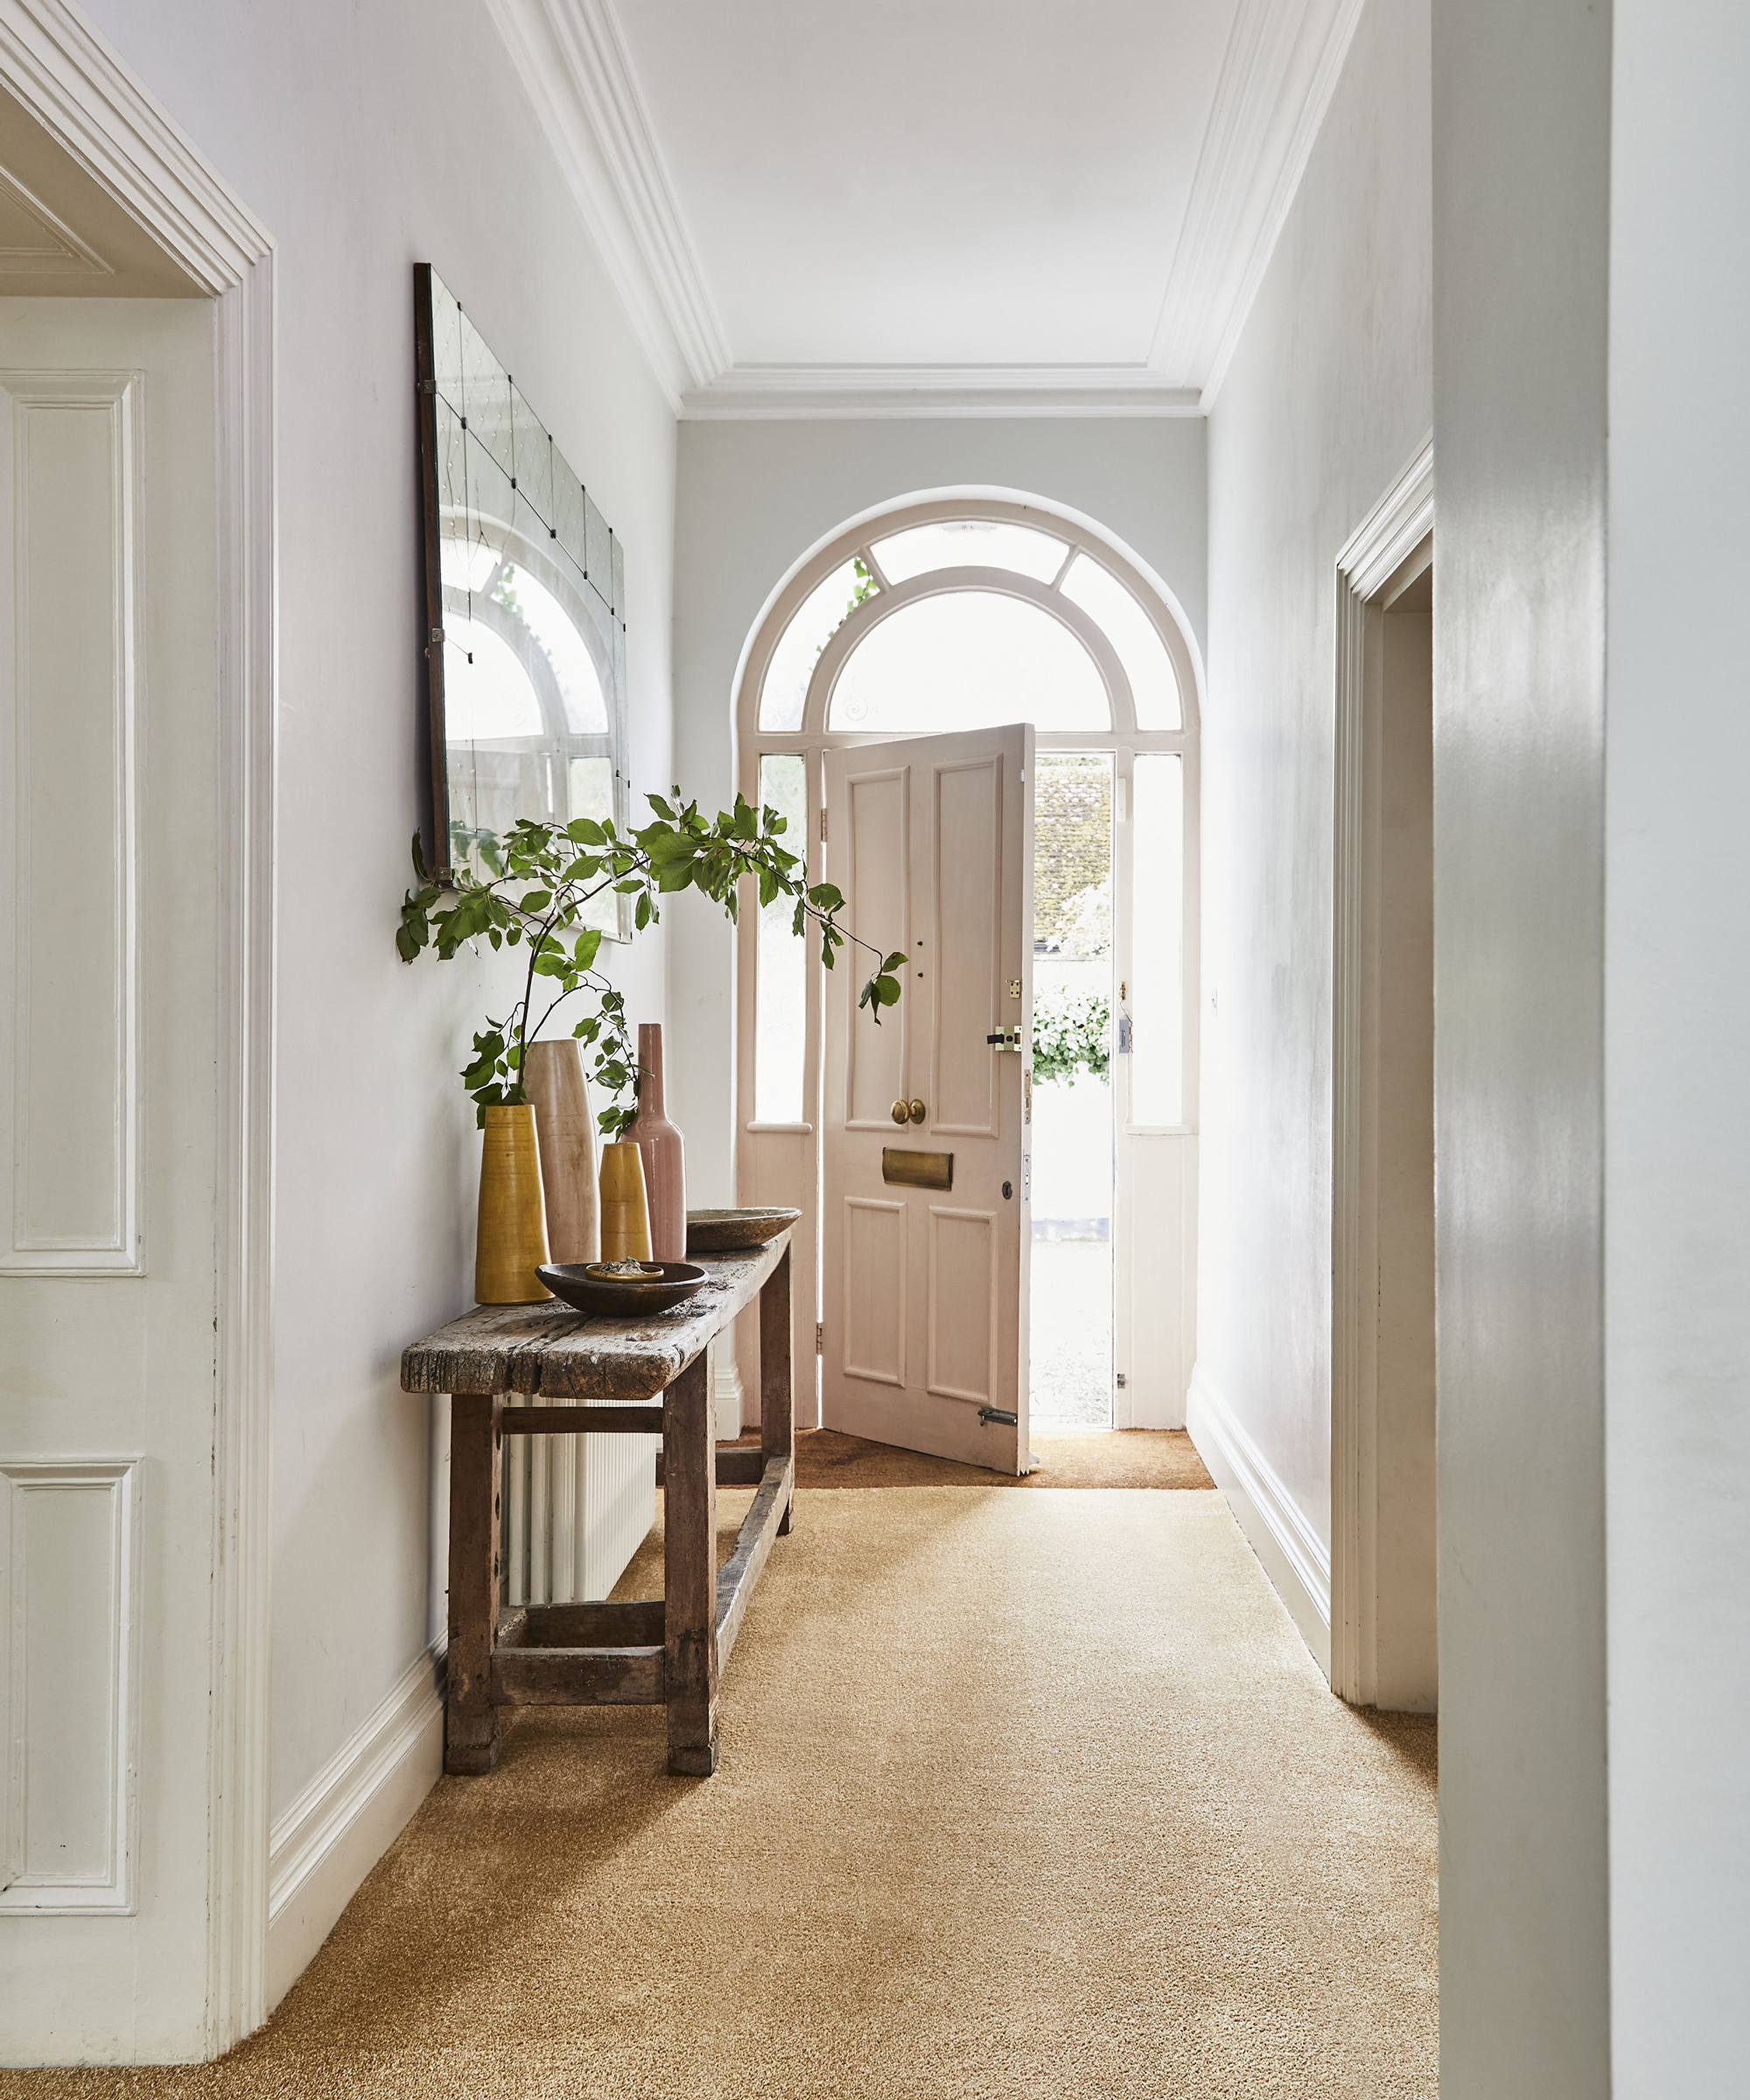 Hallway ideas by Carpetright with pink door decor and beige colored Kingston Citrine Carpet at £9.99 per meter squared